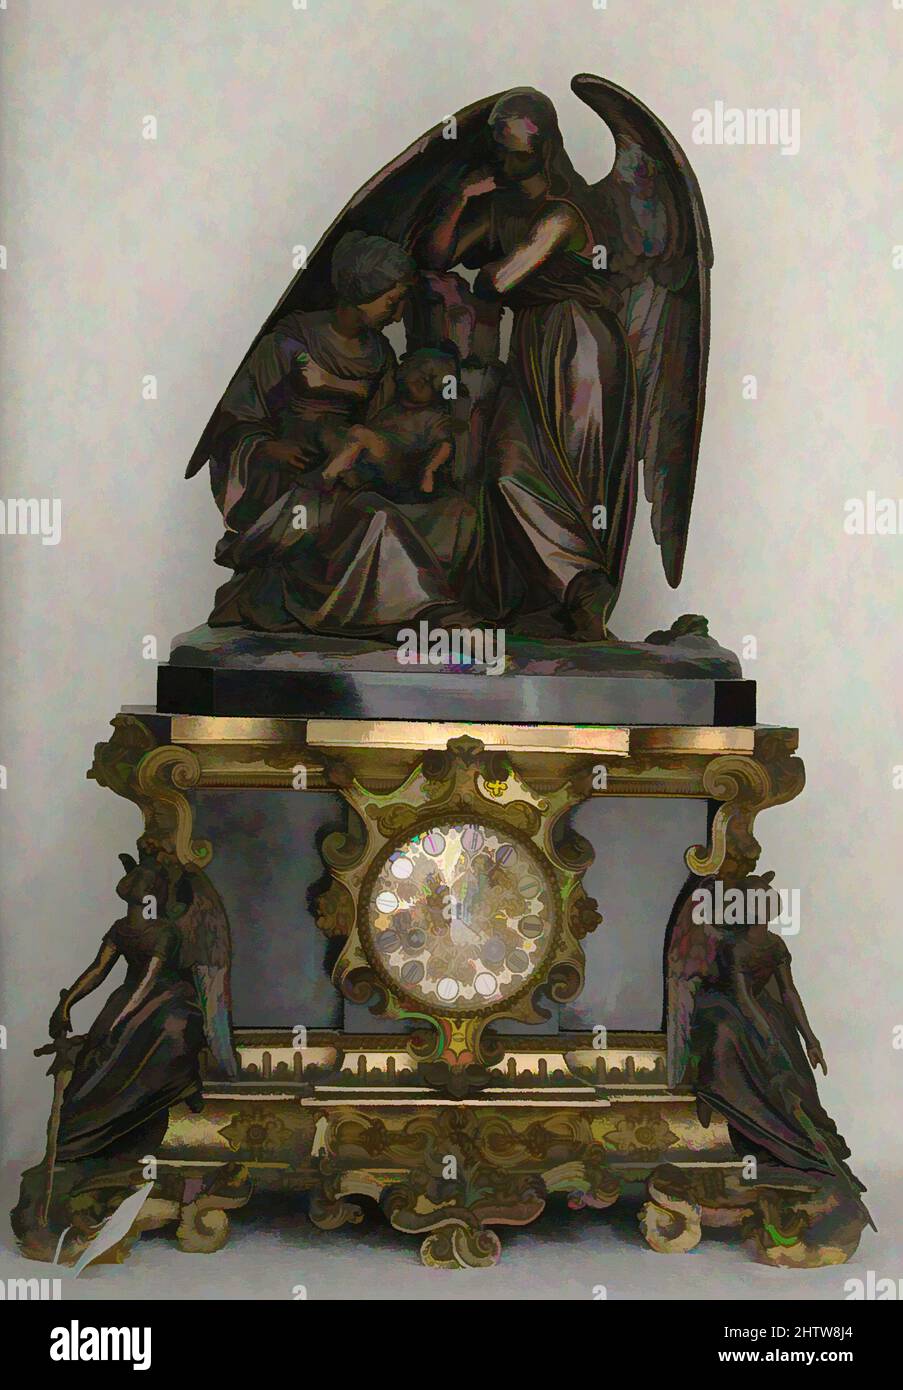 Art inspired by Mantel clock, Honoré Pons (recorded 1807–50), 1840–50, French, Paris, Case: bronze, gilded and patinated; marble; wood; glass; Dial: gilt brass and enamel; Movement: brass and steel, Overall: 21 1/4 × 15 1/2 × 7 1/4 in. (54 × 39.4 × 18.4 cm), Horology, Honoré Pons (, Classic works modernized by Artotop with a splash of modernity. Shapes, color and value, eye-catching visual impact on art. Emotions through freedom of artworks in a contemporary way. A timeless message pursuing a wildly creative new direction. Artists turning to the digital medium and creating the Artotop NFT Stock Photo